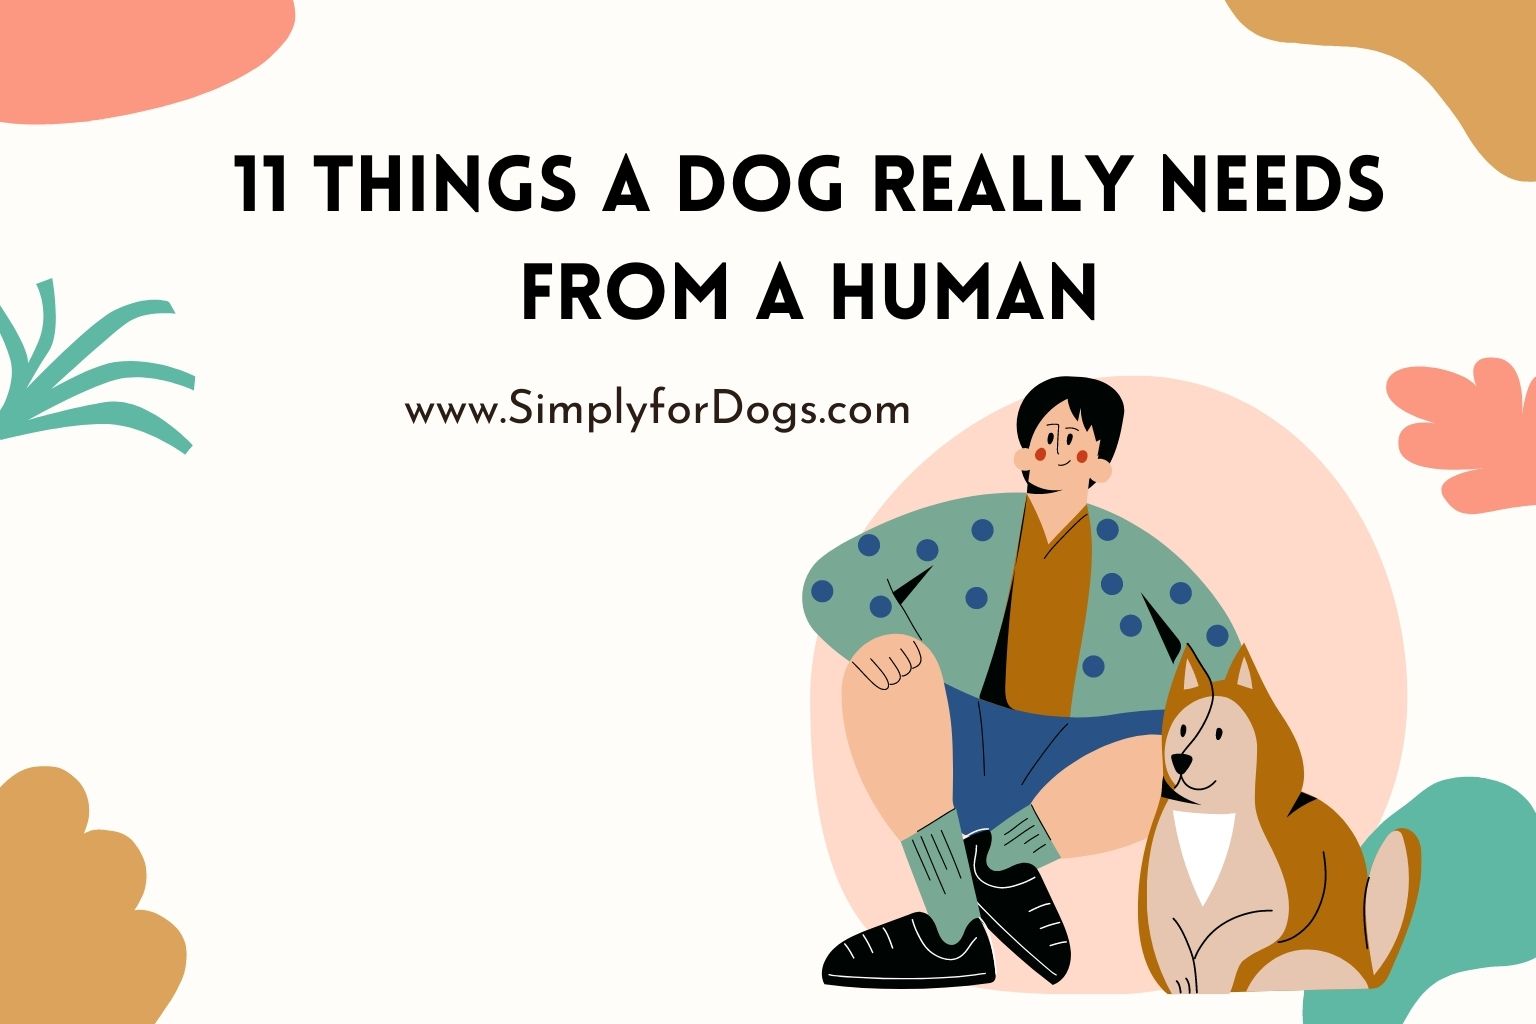 11 Things a Dog Really Needs from a Human